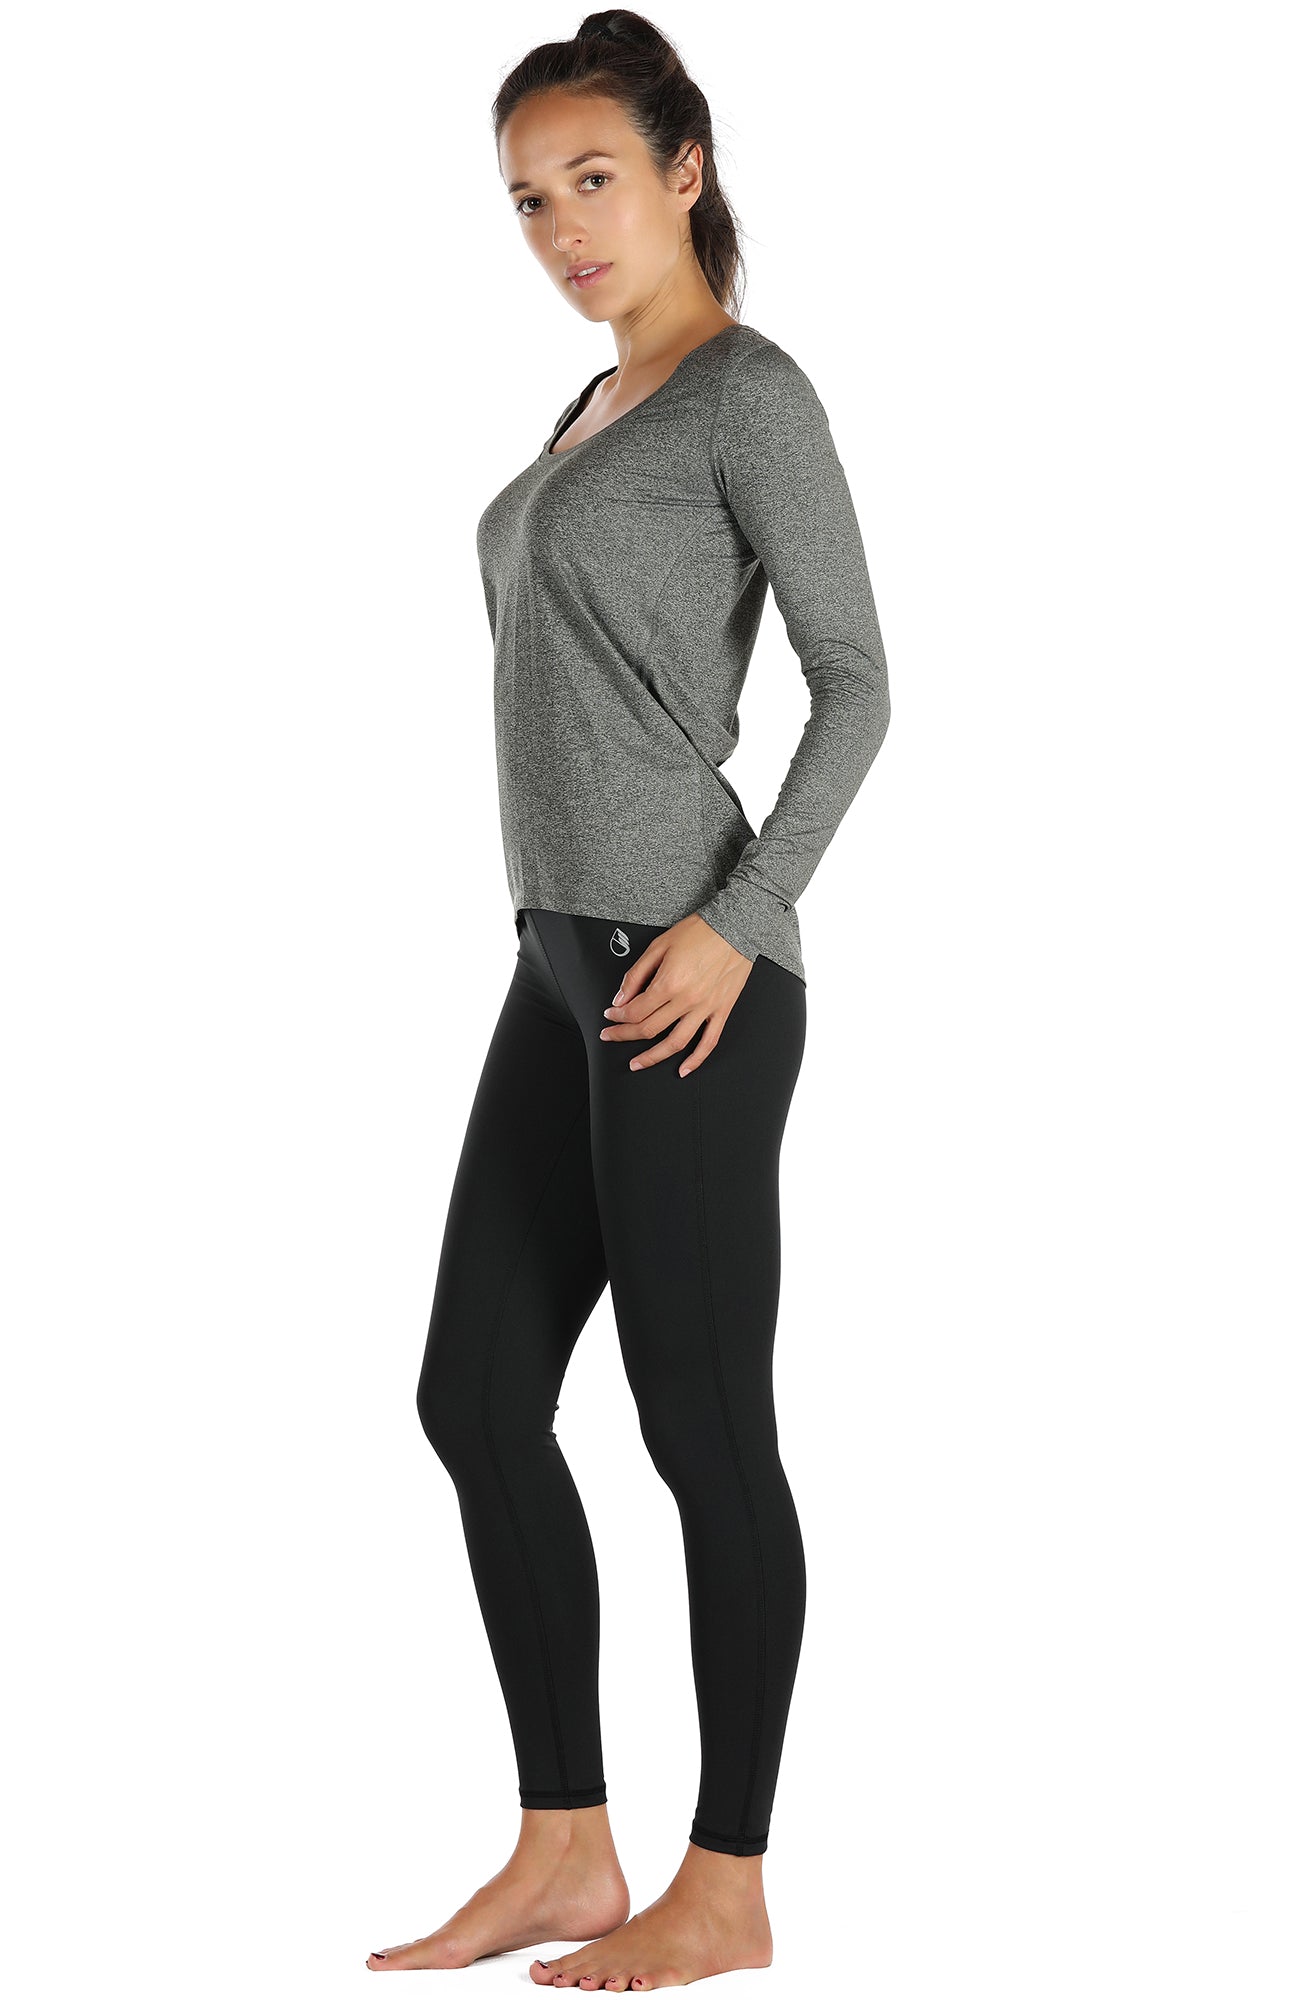 icyzone Long Sleeve Workout Shirts for Women - 3 Pack Athletic T Shirt,  Running Exercise Yoga Tops (Black Melange/Grey/Ice Green, S) at   Women's Clothing store